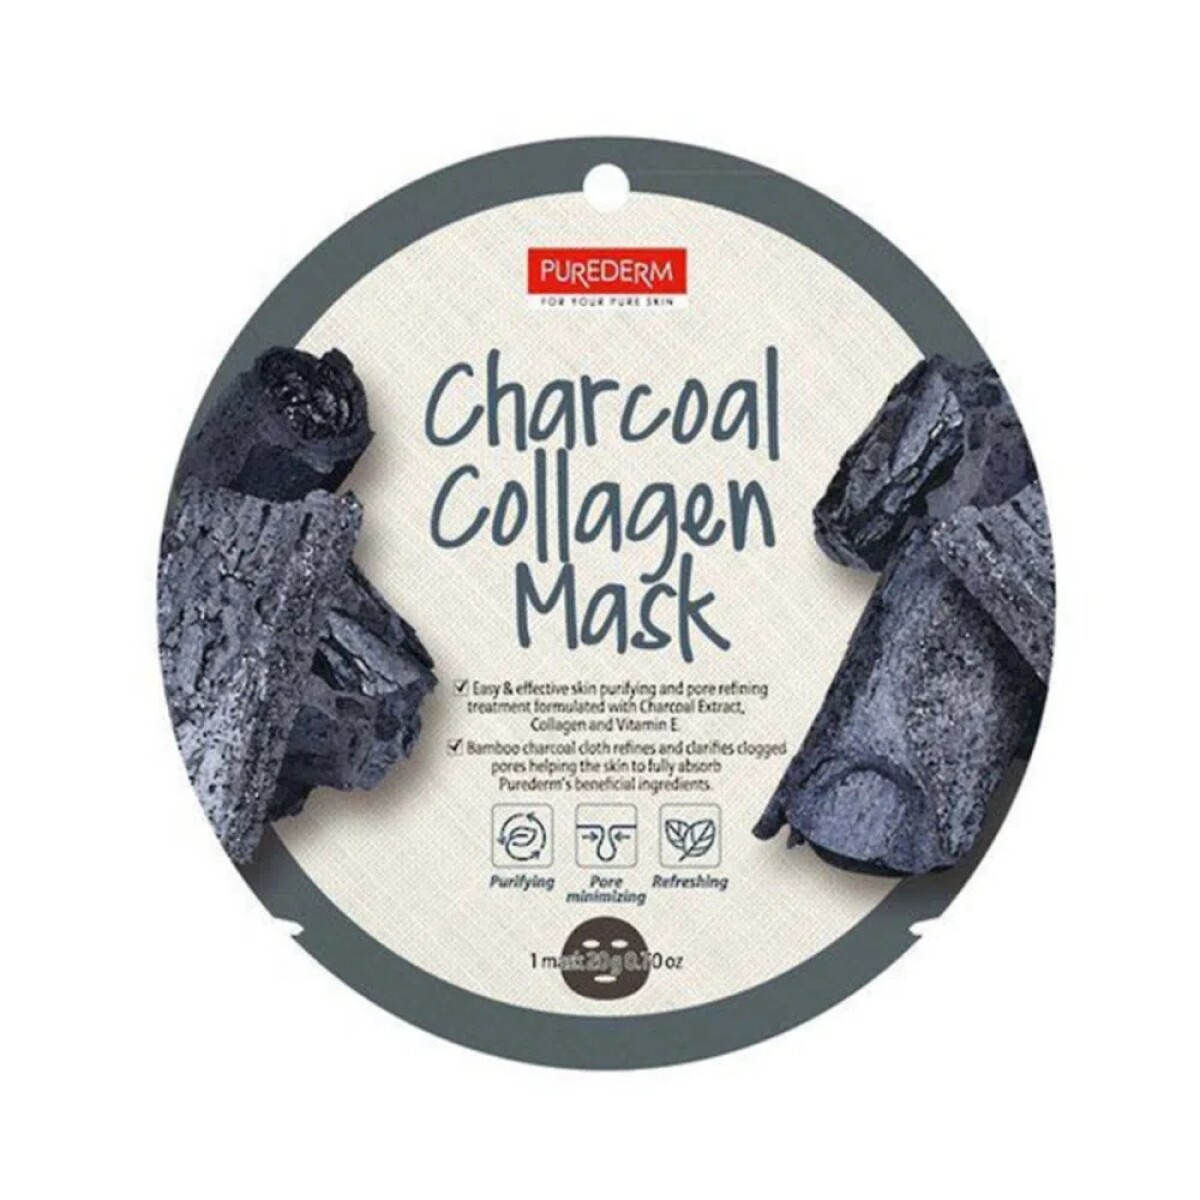 Purederm Charcoal Collagen Mask 